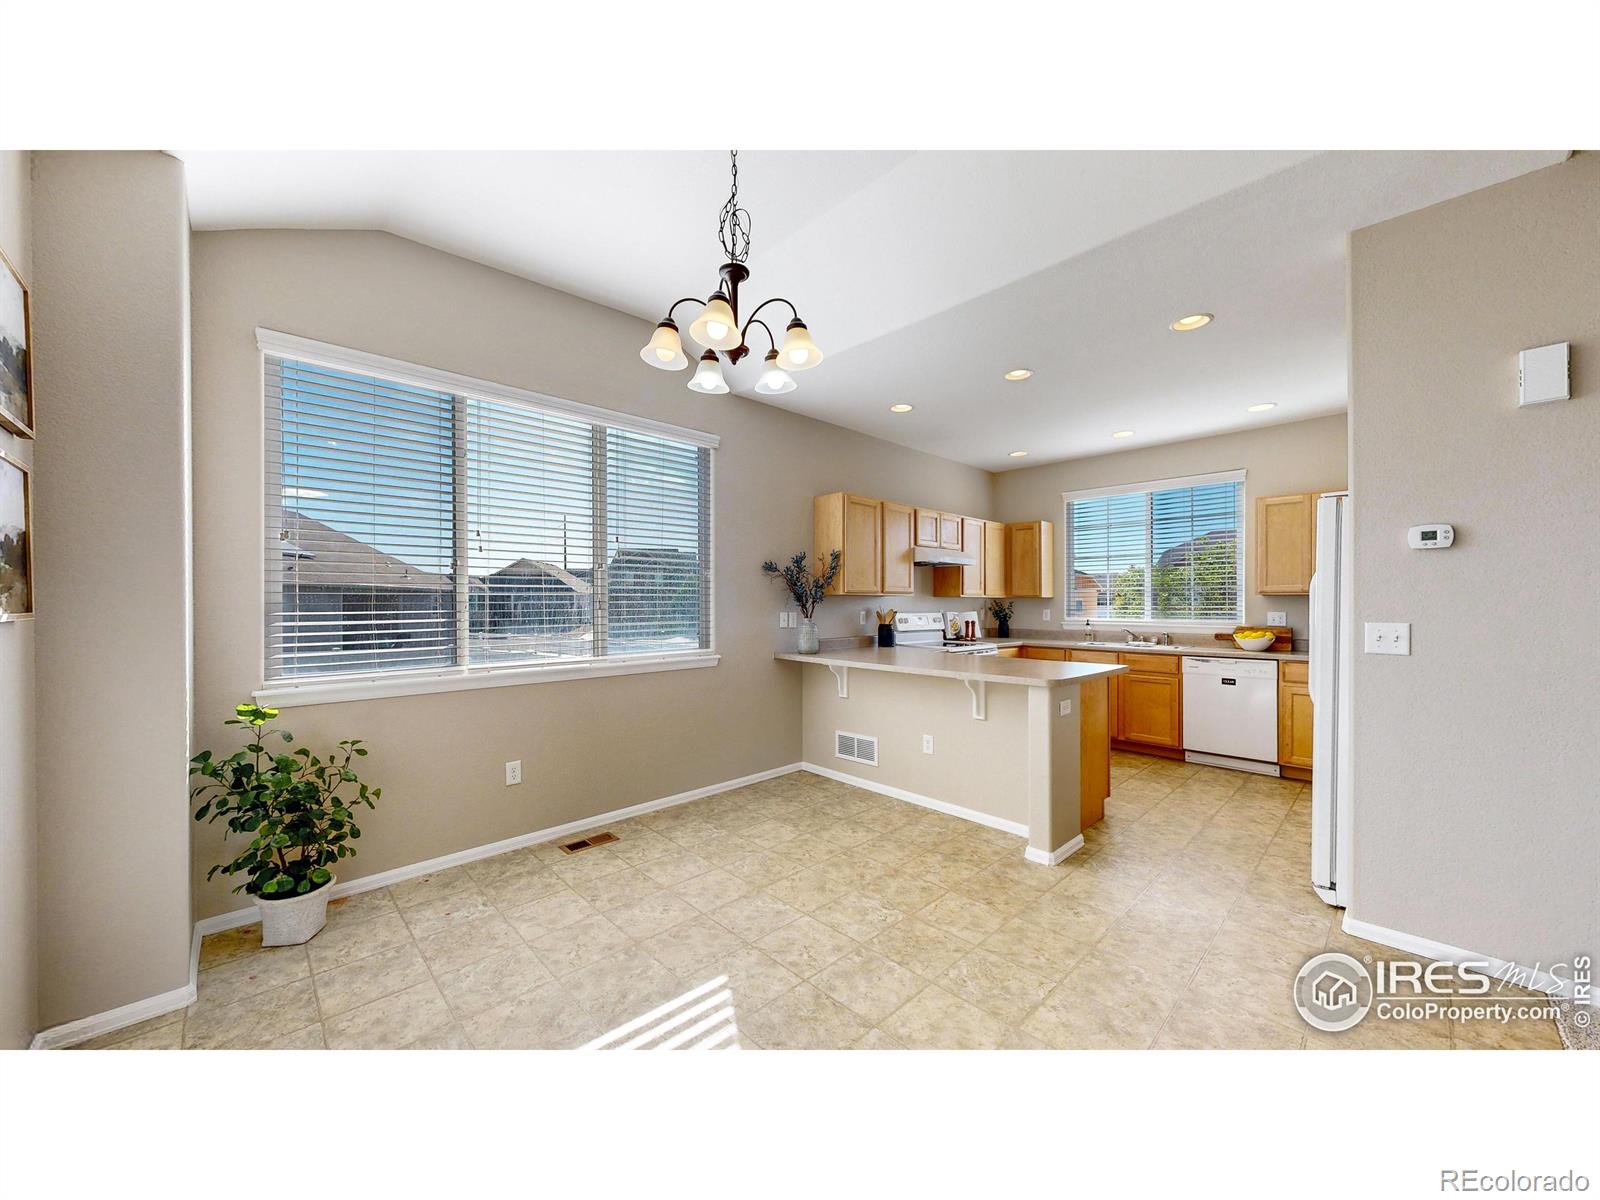 Report Image for 1012  Cherrybrook Drive,Windsor, Colorado